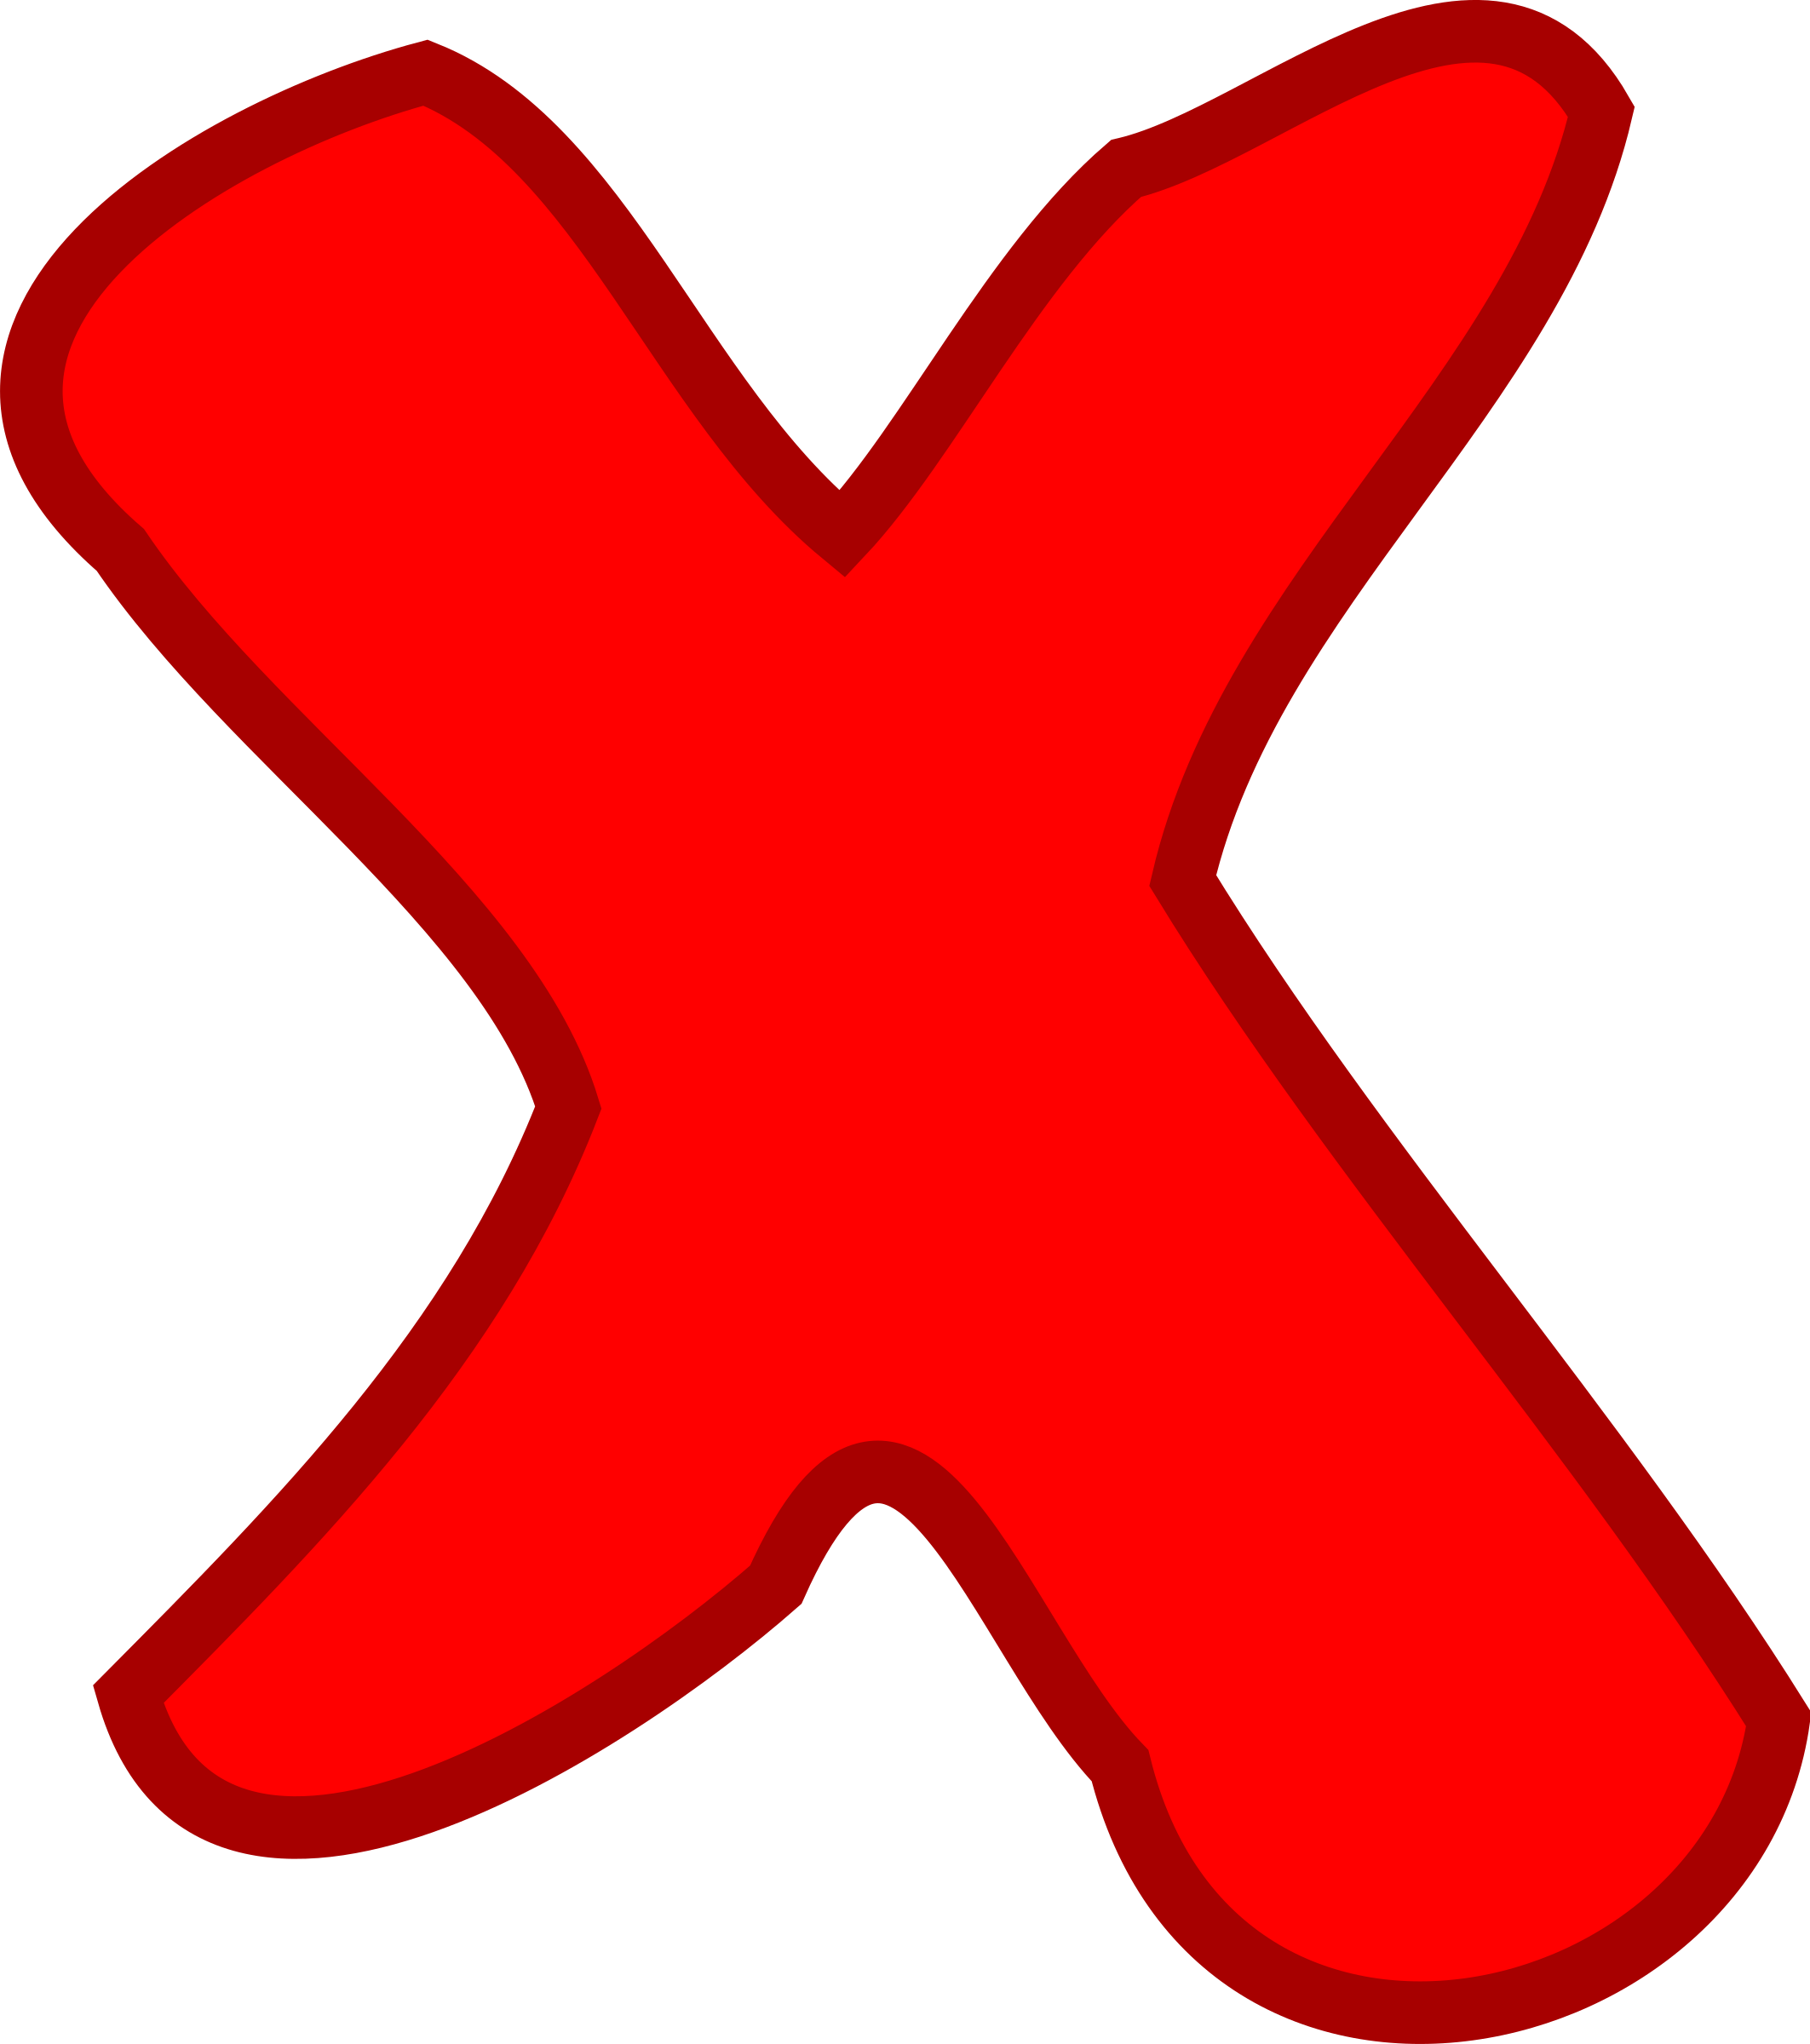 Clipart - red not OK / failure symbol